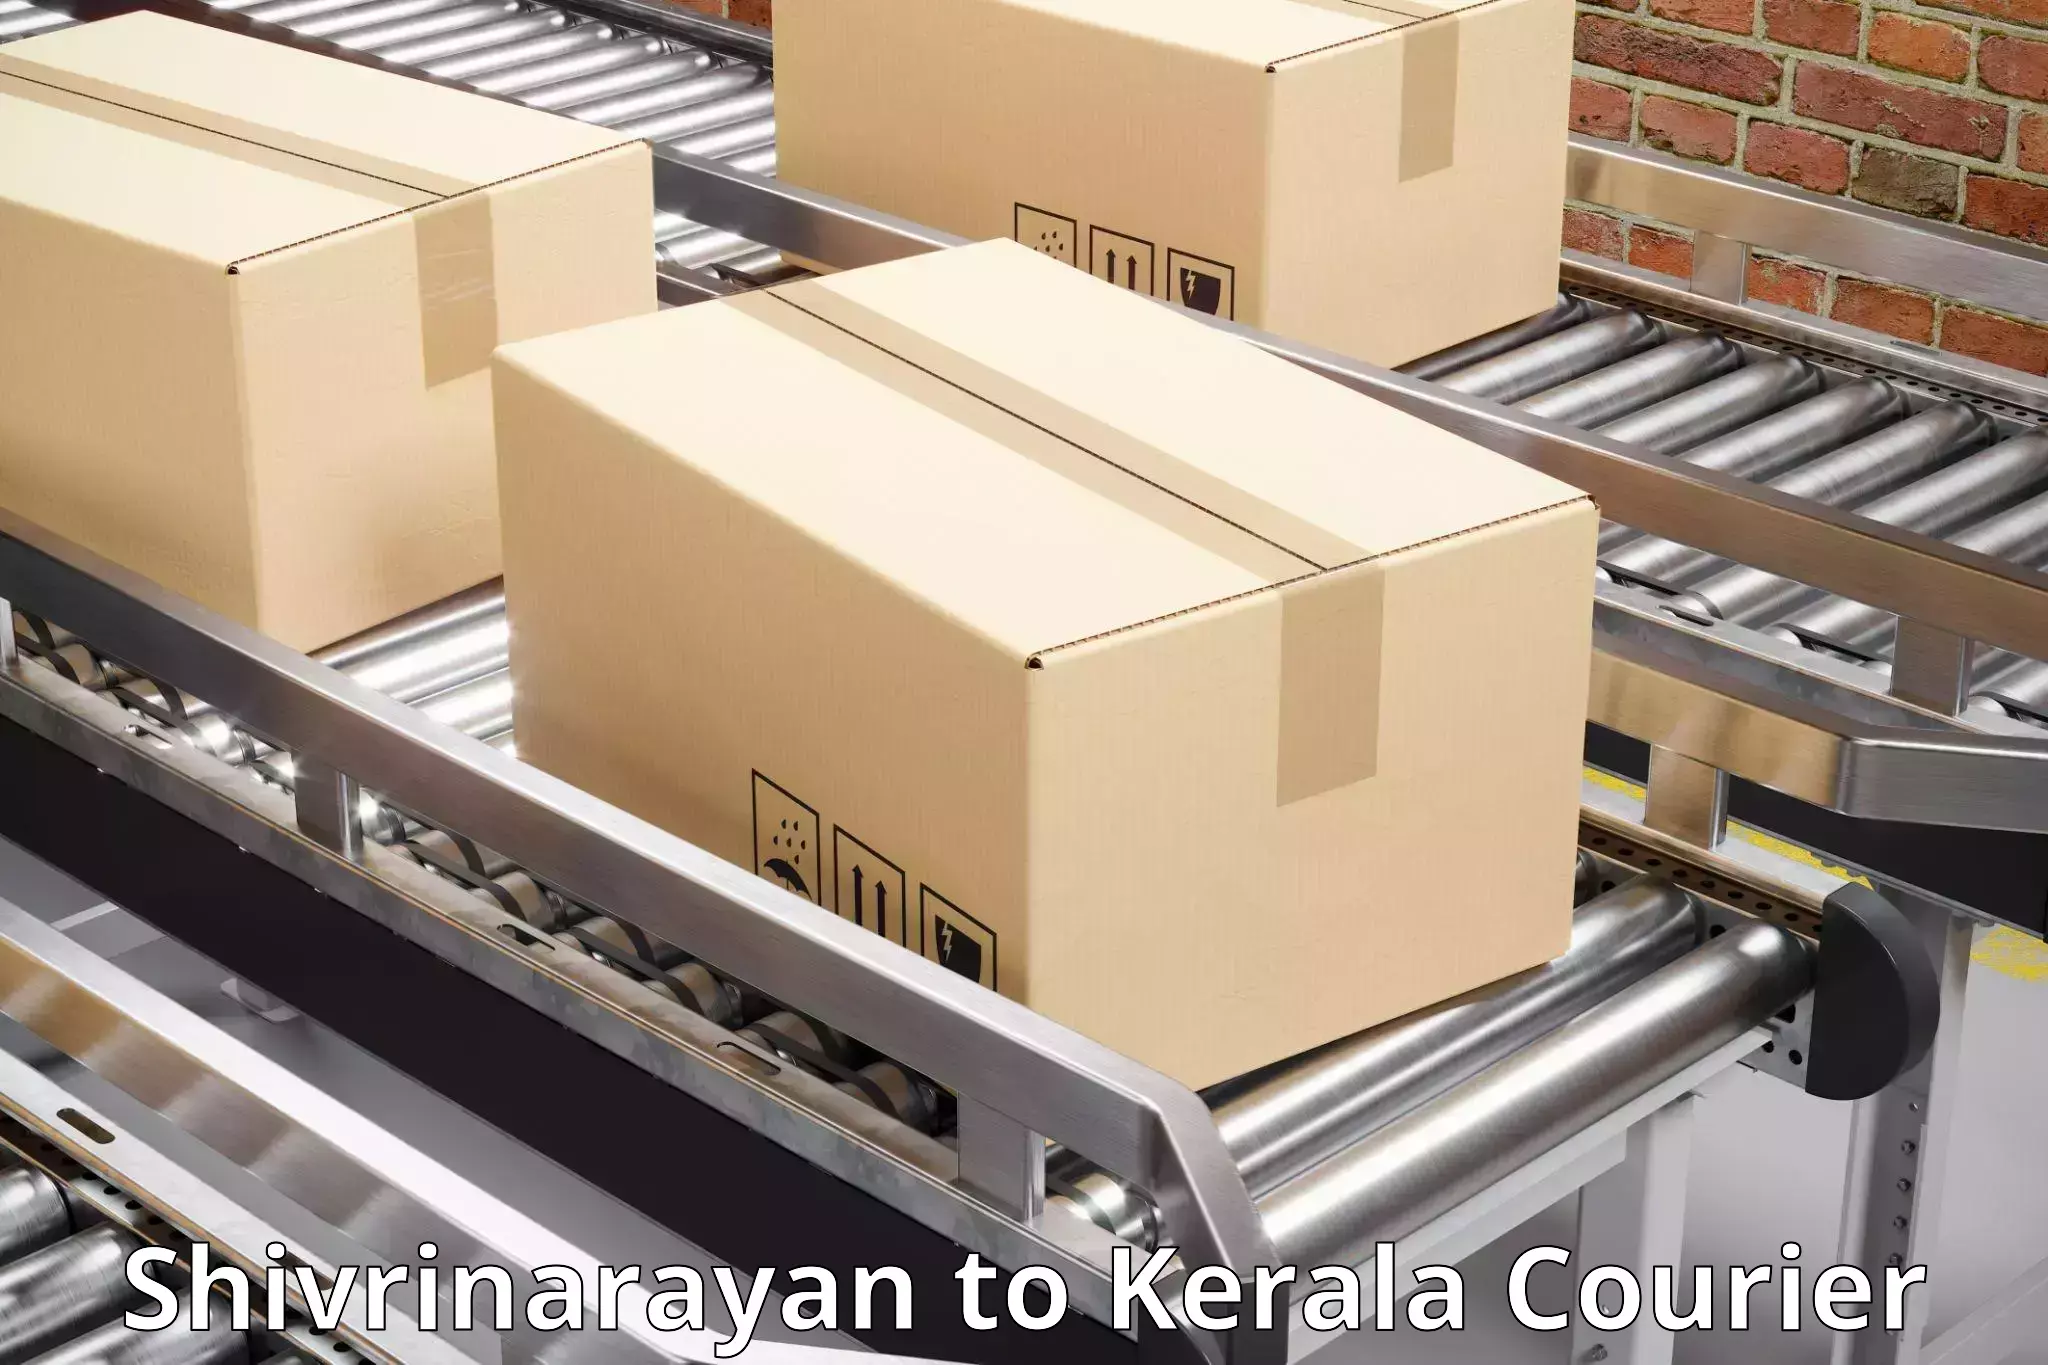 Local courier options Shivrinarayan to Thrissur